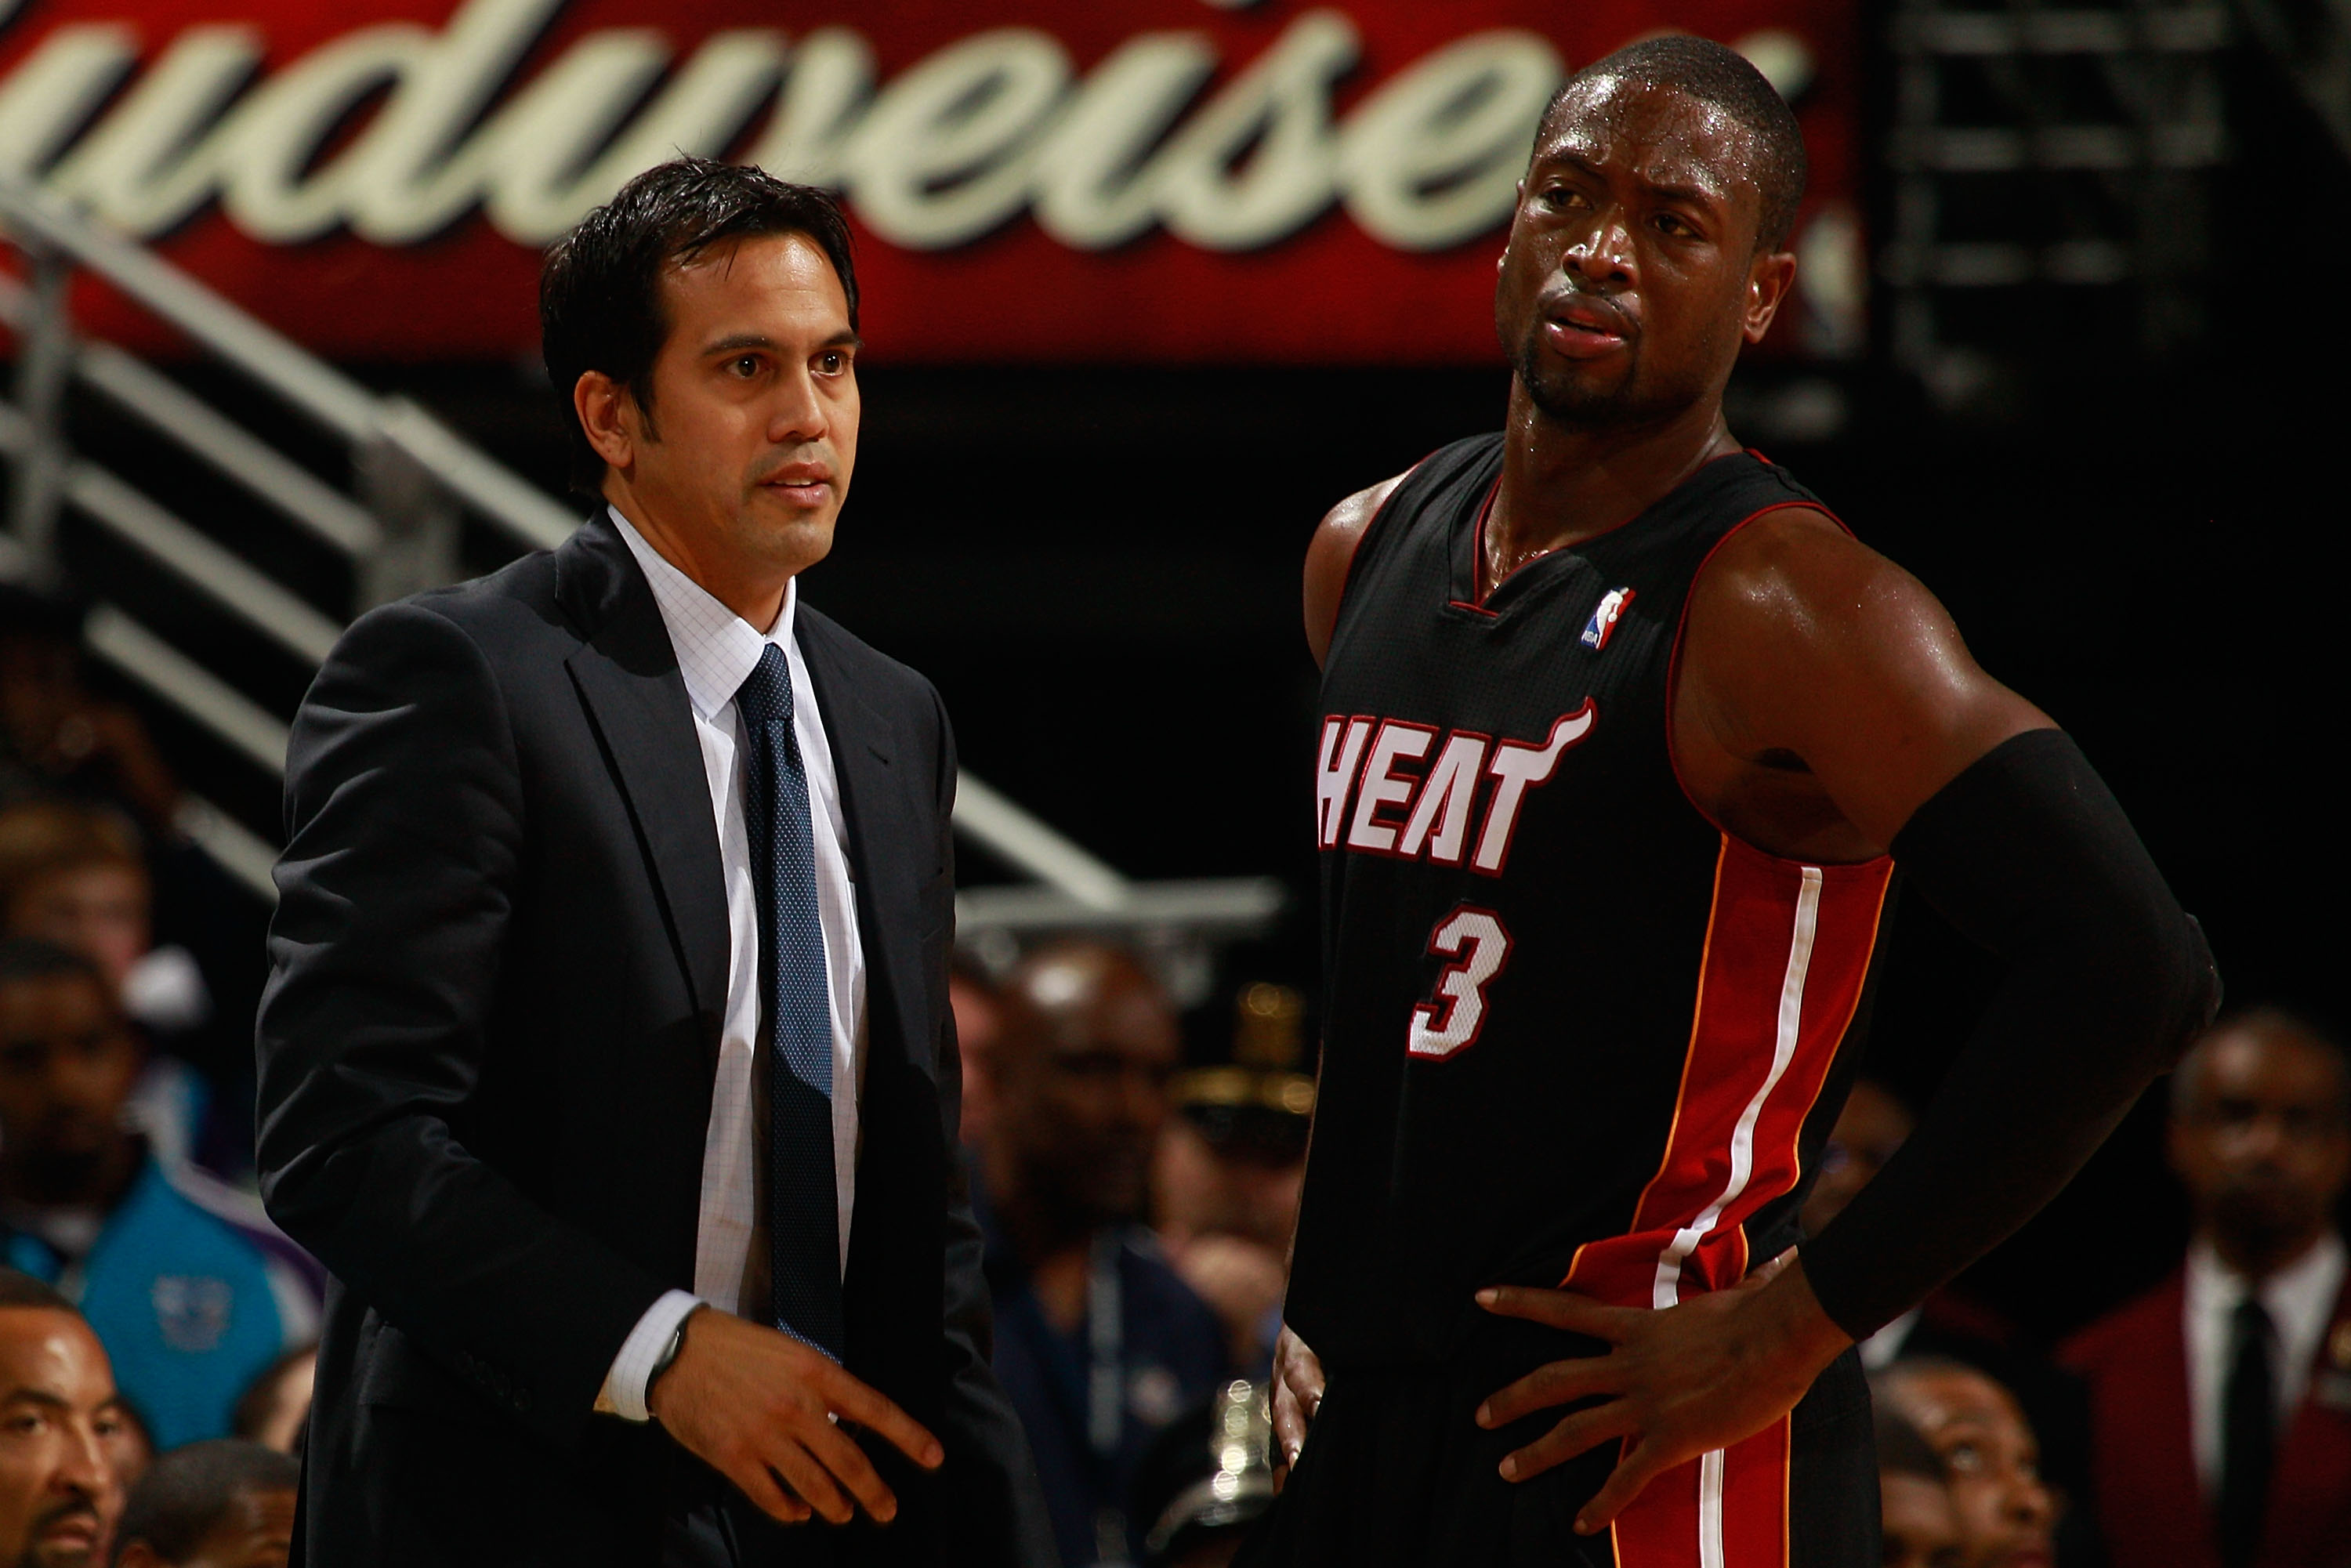 NBA on TNT on X: I always say Pat Riley set the standard, but Coach Spo  improved on it. @DwyaneWade on Erik Spoelstra being named as one of the 15  greatest coaches